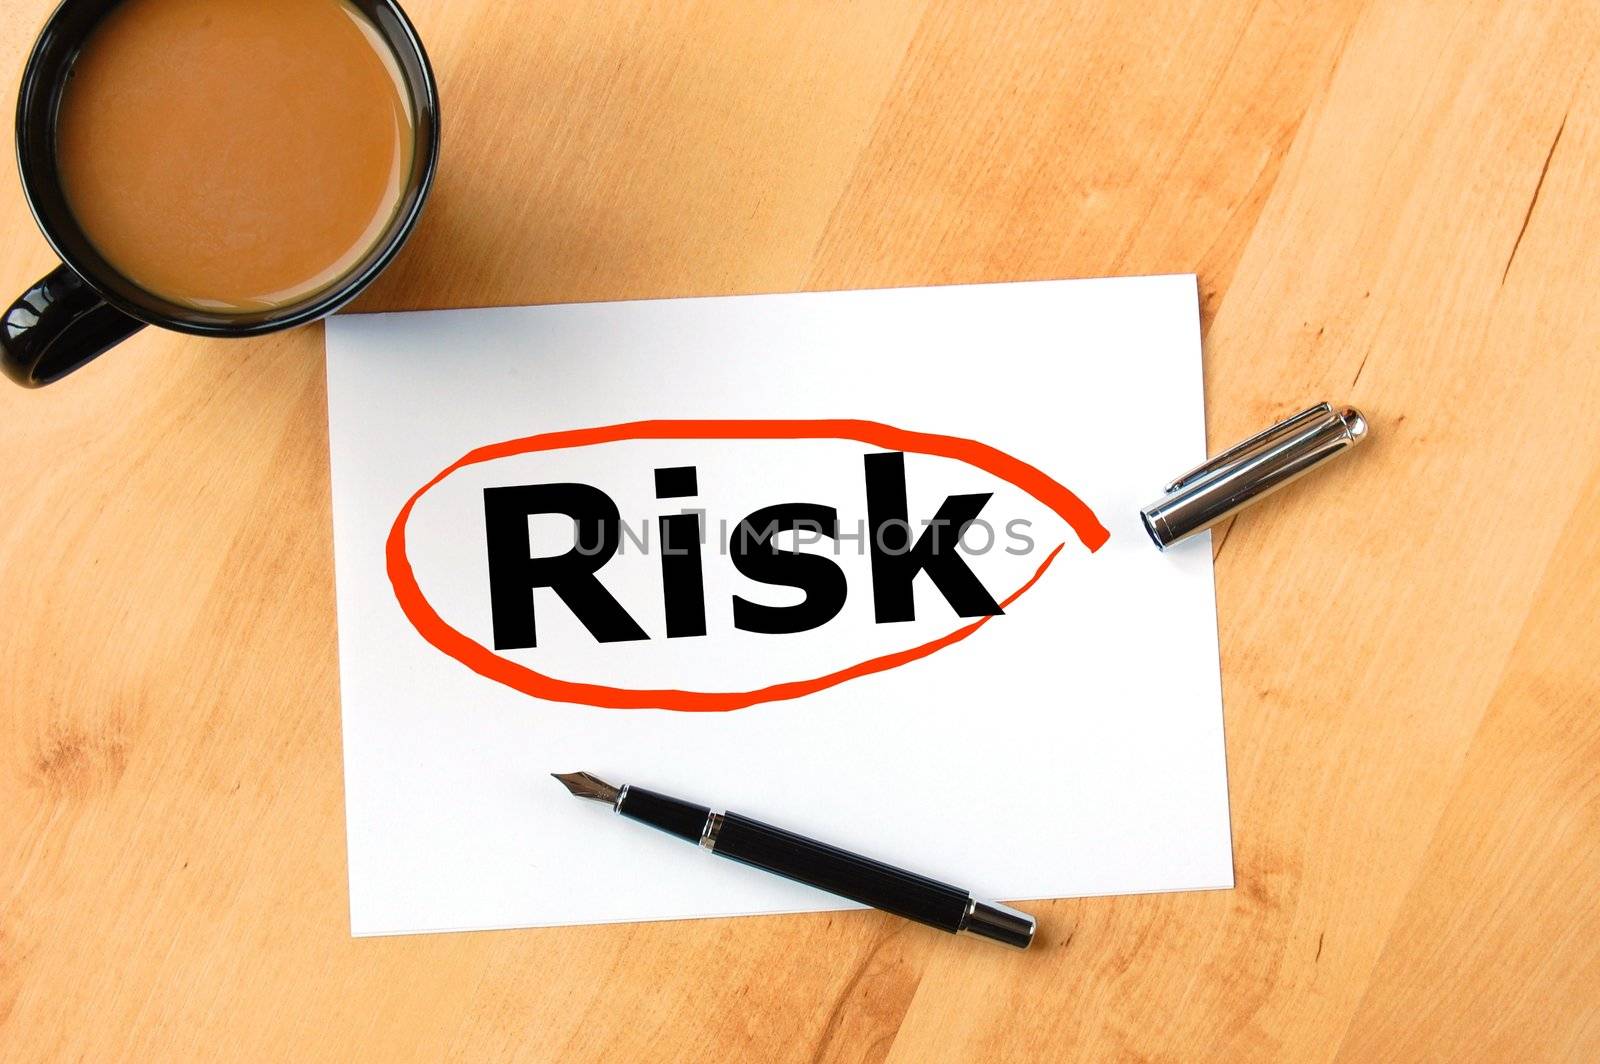 risk in financial business investment is dangerous